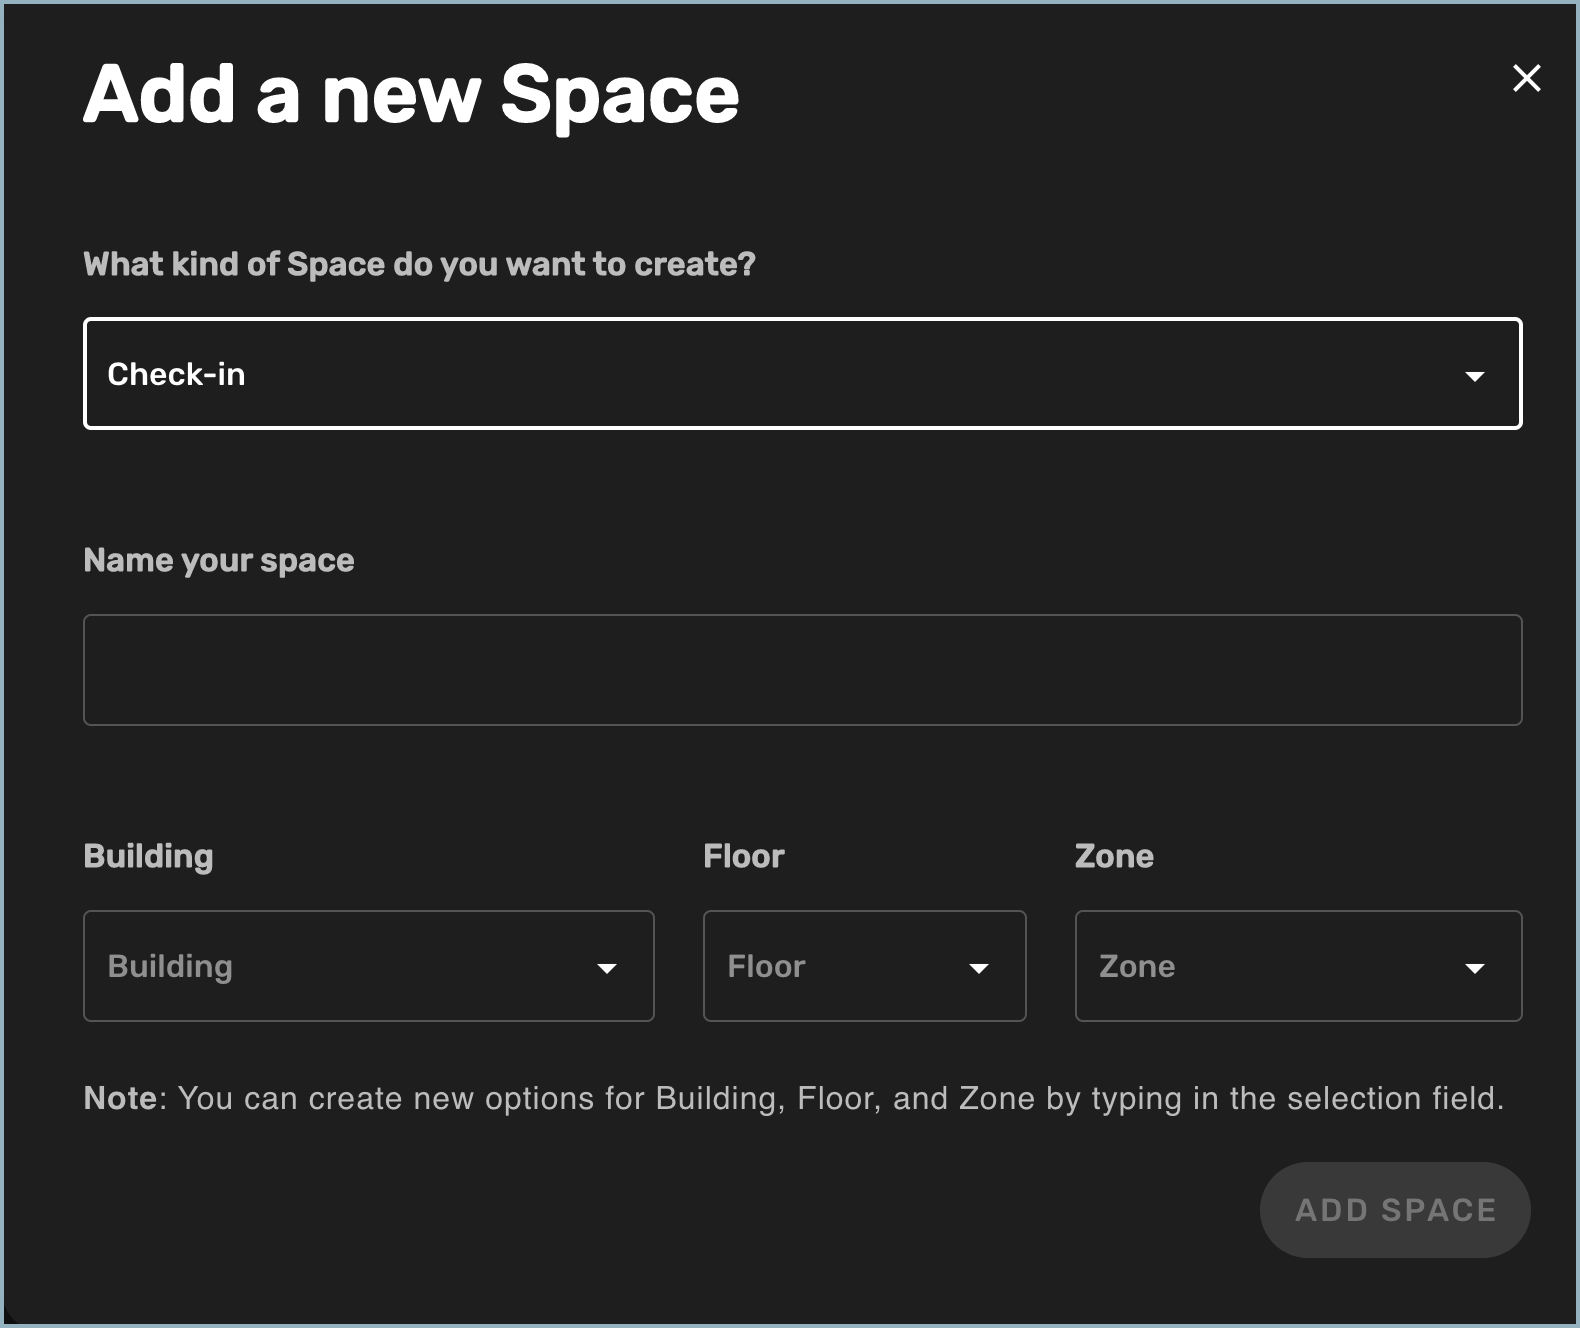 Adding check-in space